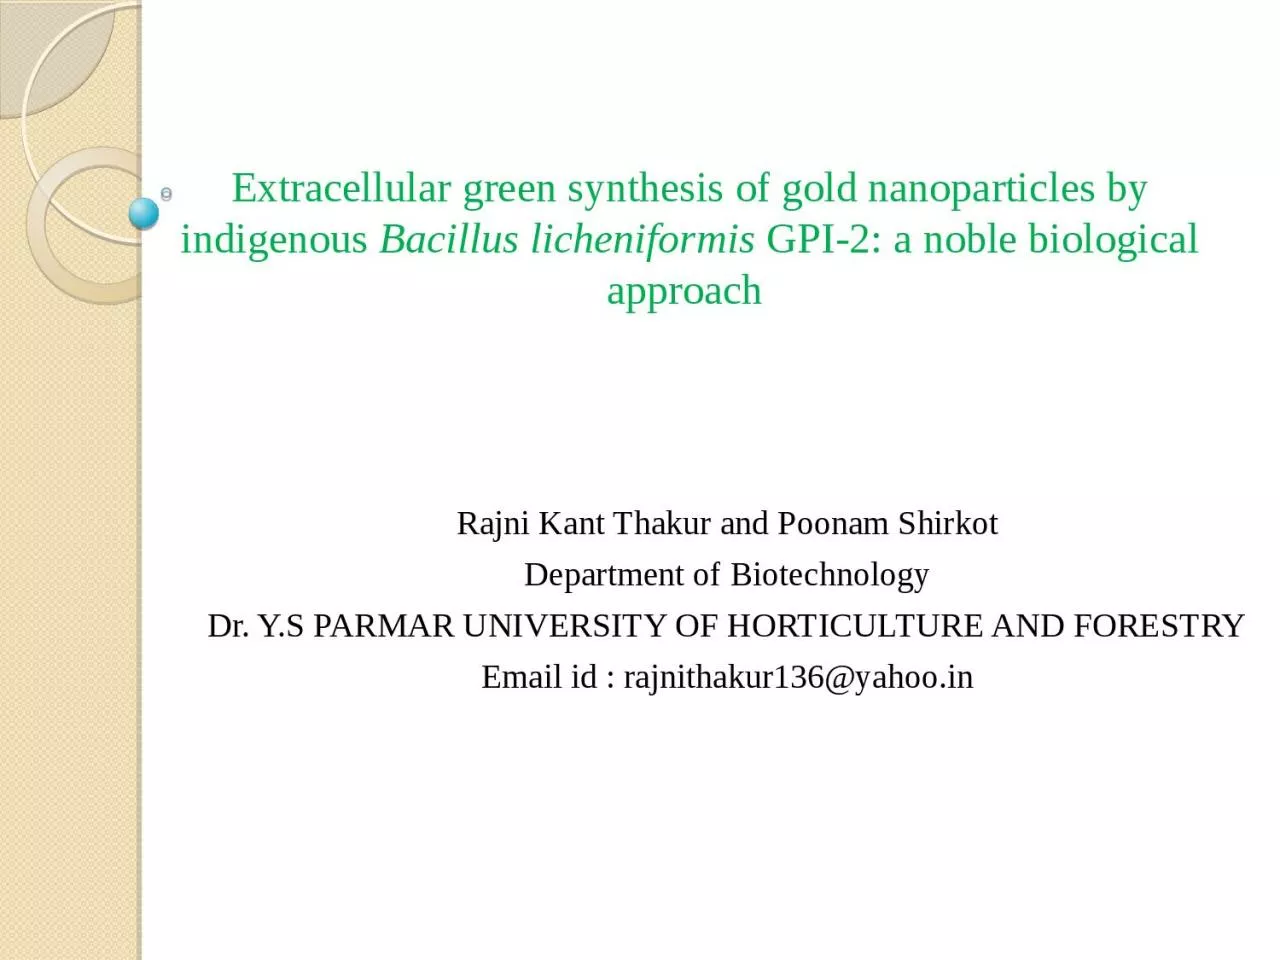 Extracellular green synthesis of gold nanoparticles by indigenous